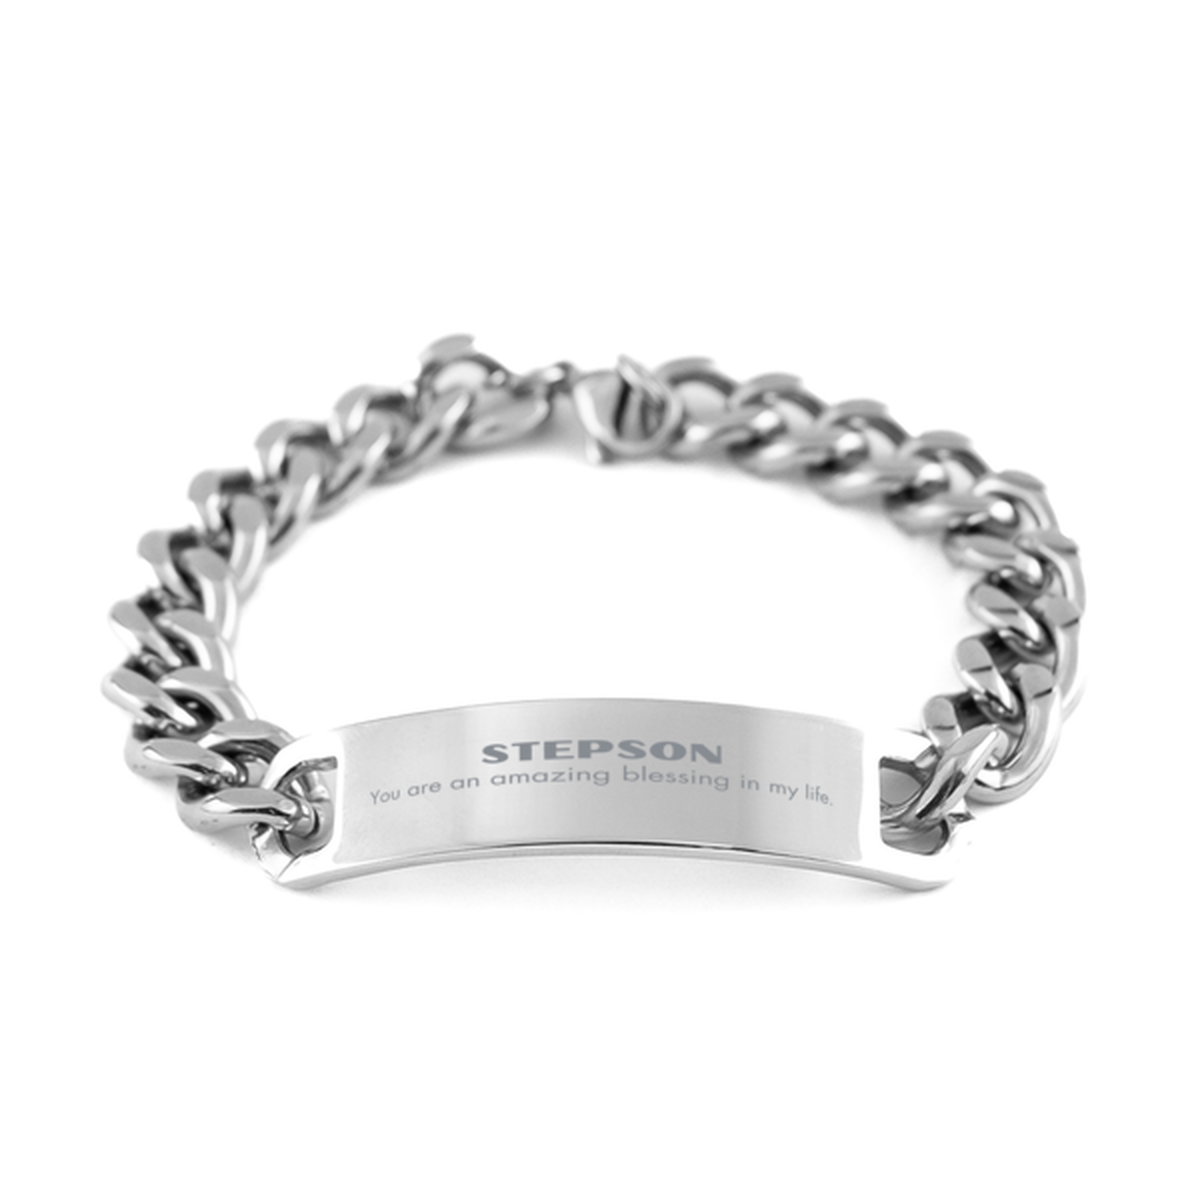 Stepson Cuban Chain Stainless Steel Bracelet, You are an amazing blessing in my life, Thank You Gifts For Stepson, Inspirational Birthday Christmas Unique Gifts For Stepson